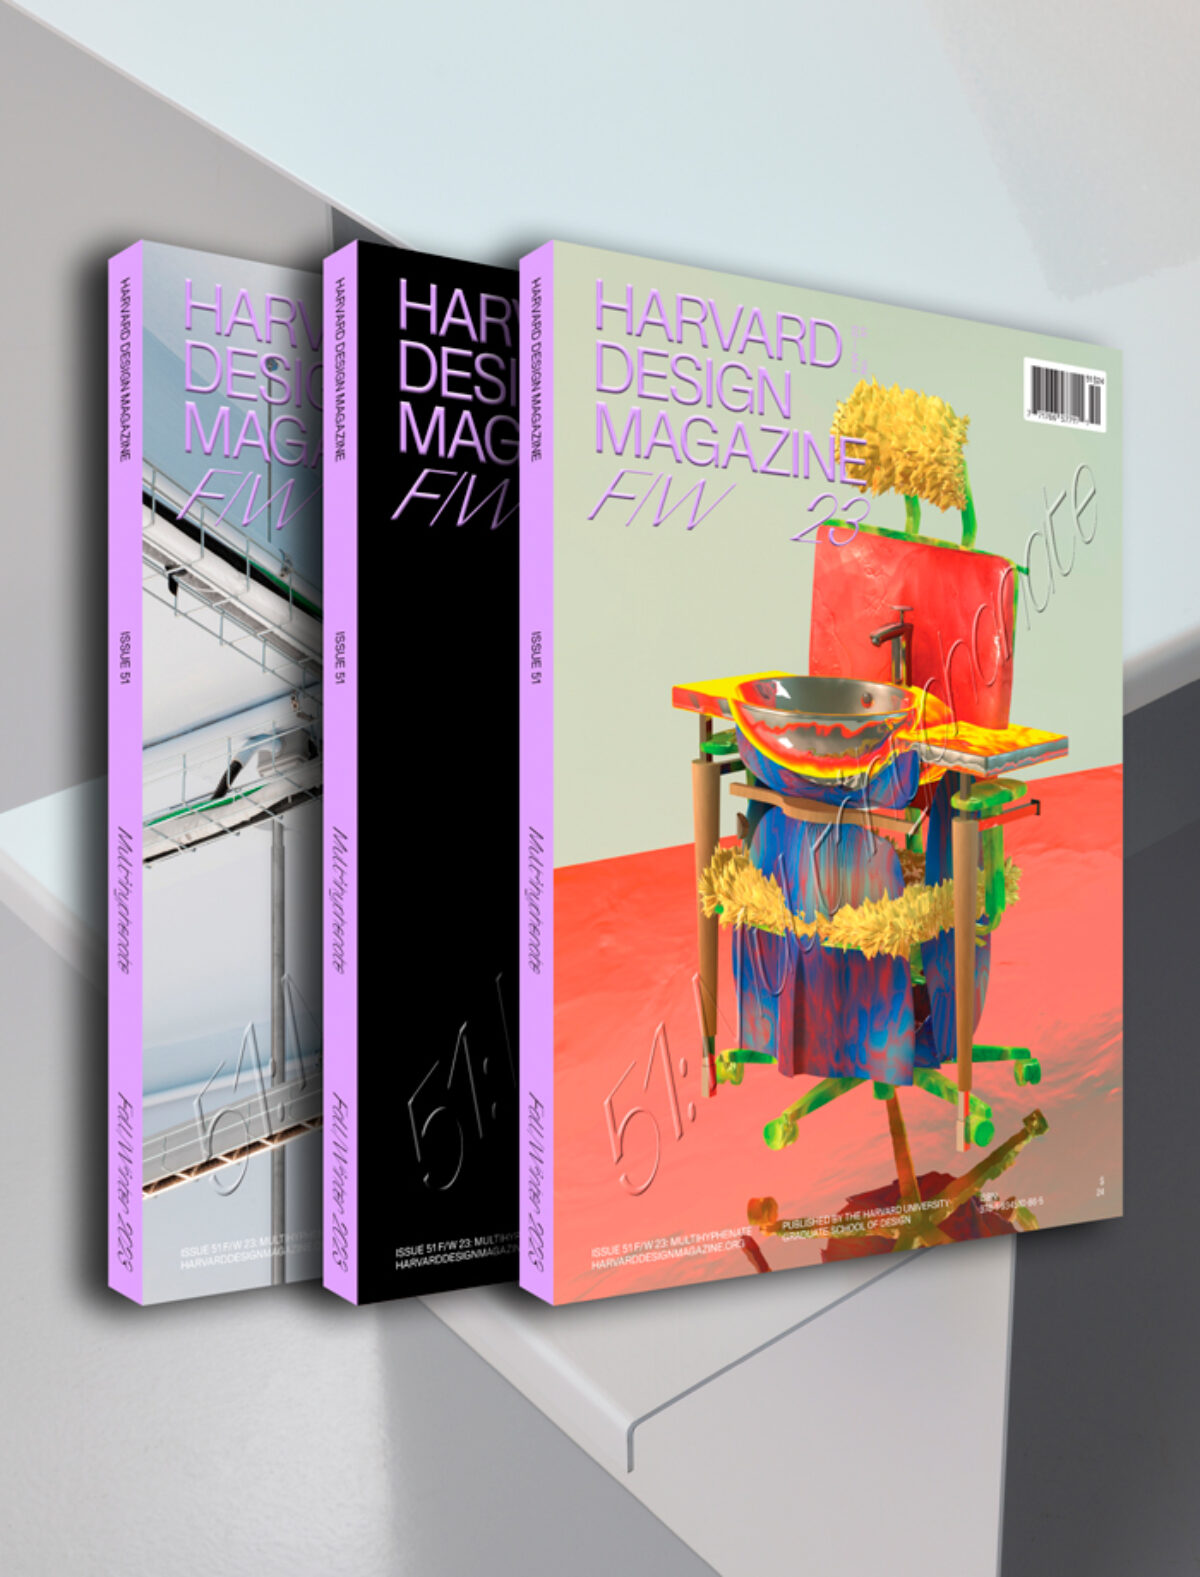 Three covers of Harvard Design Magazine fanned out on top of each other with a grey background